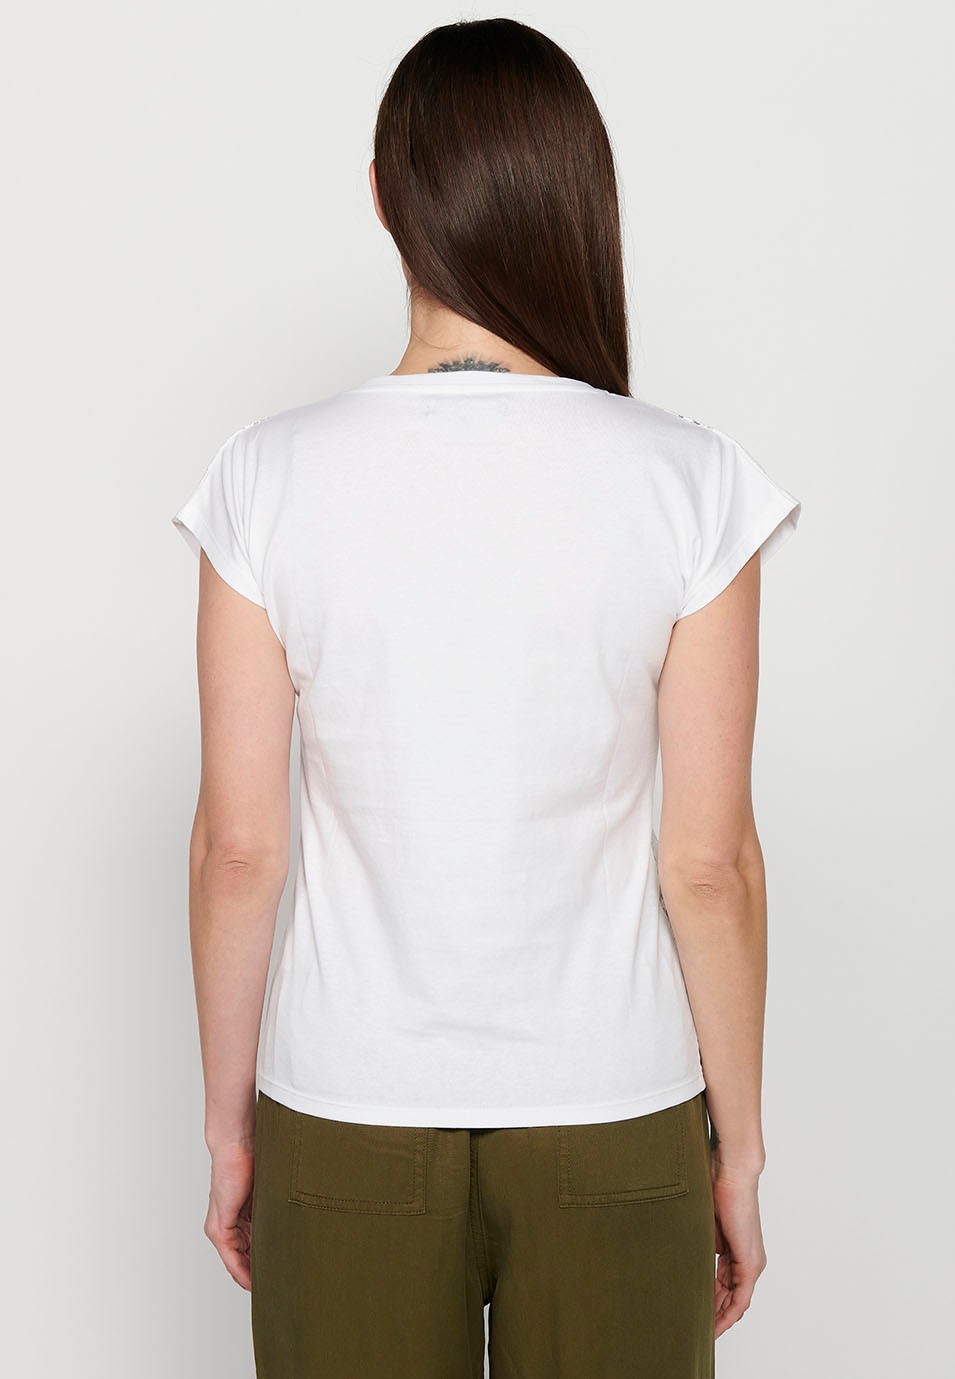 Short-sleeved T-shirt with lace detail and front print, white color for women